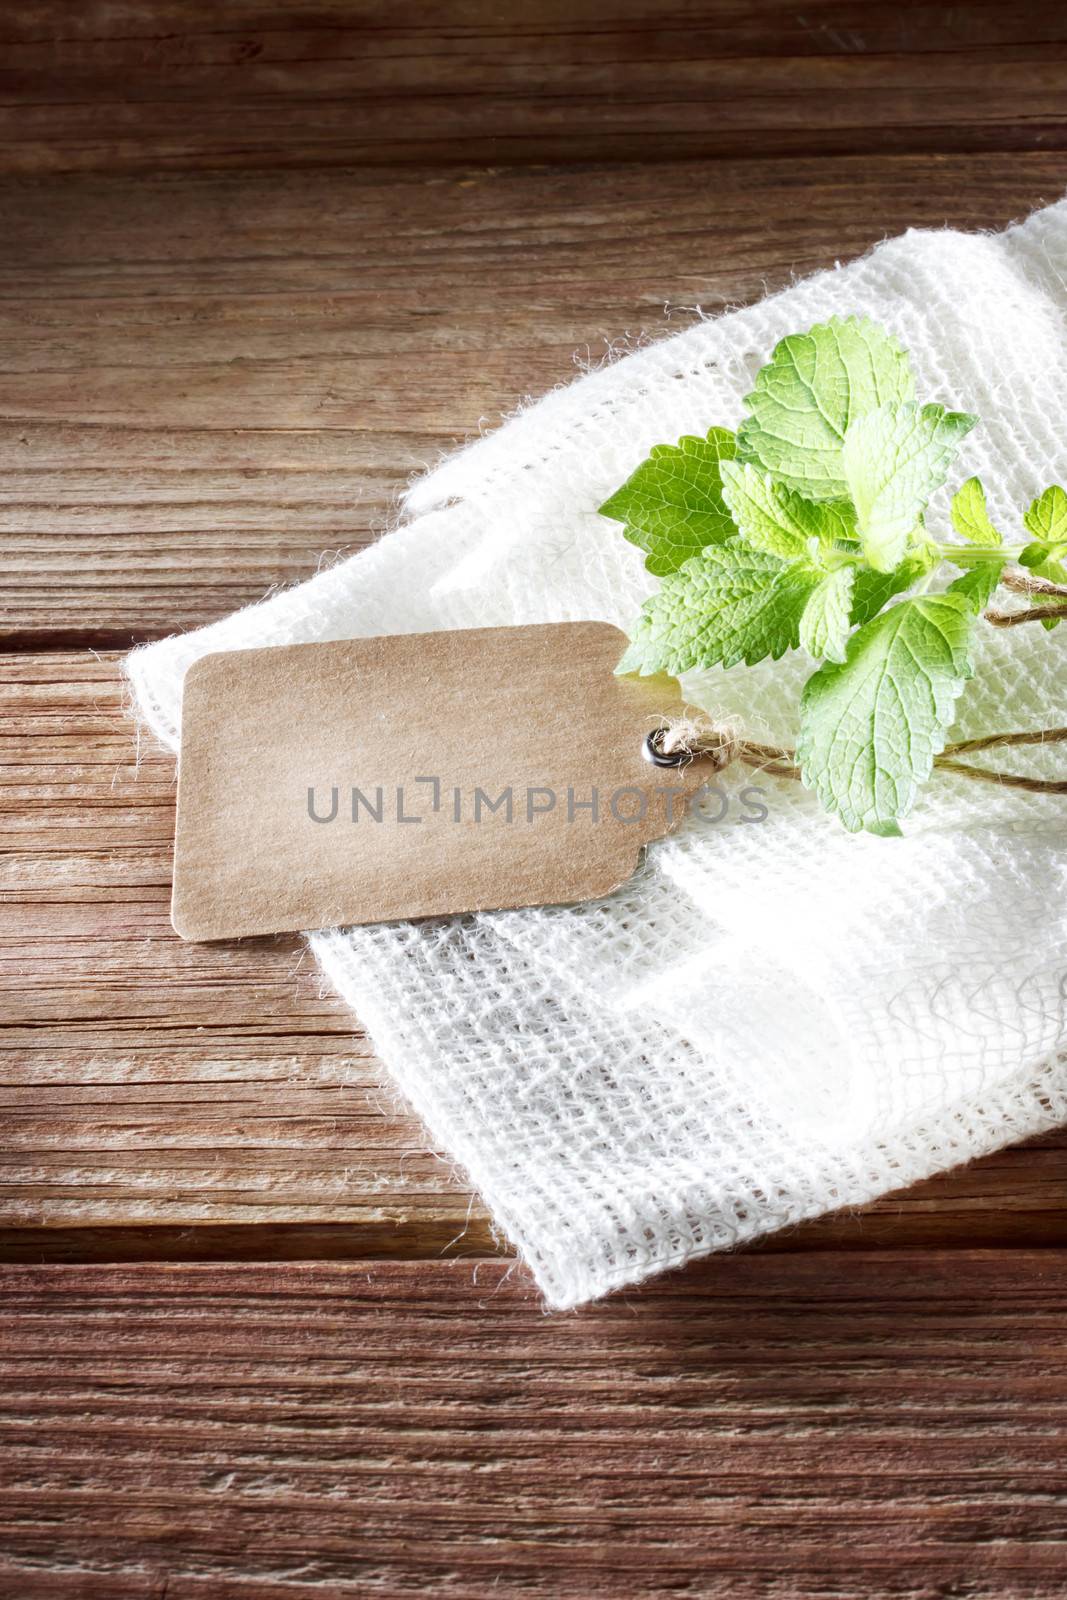 Blank tag on a rustic wooden table with burlap and a sprig of mint 